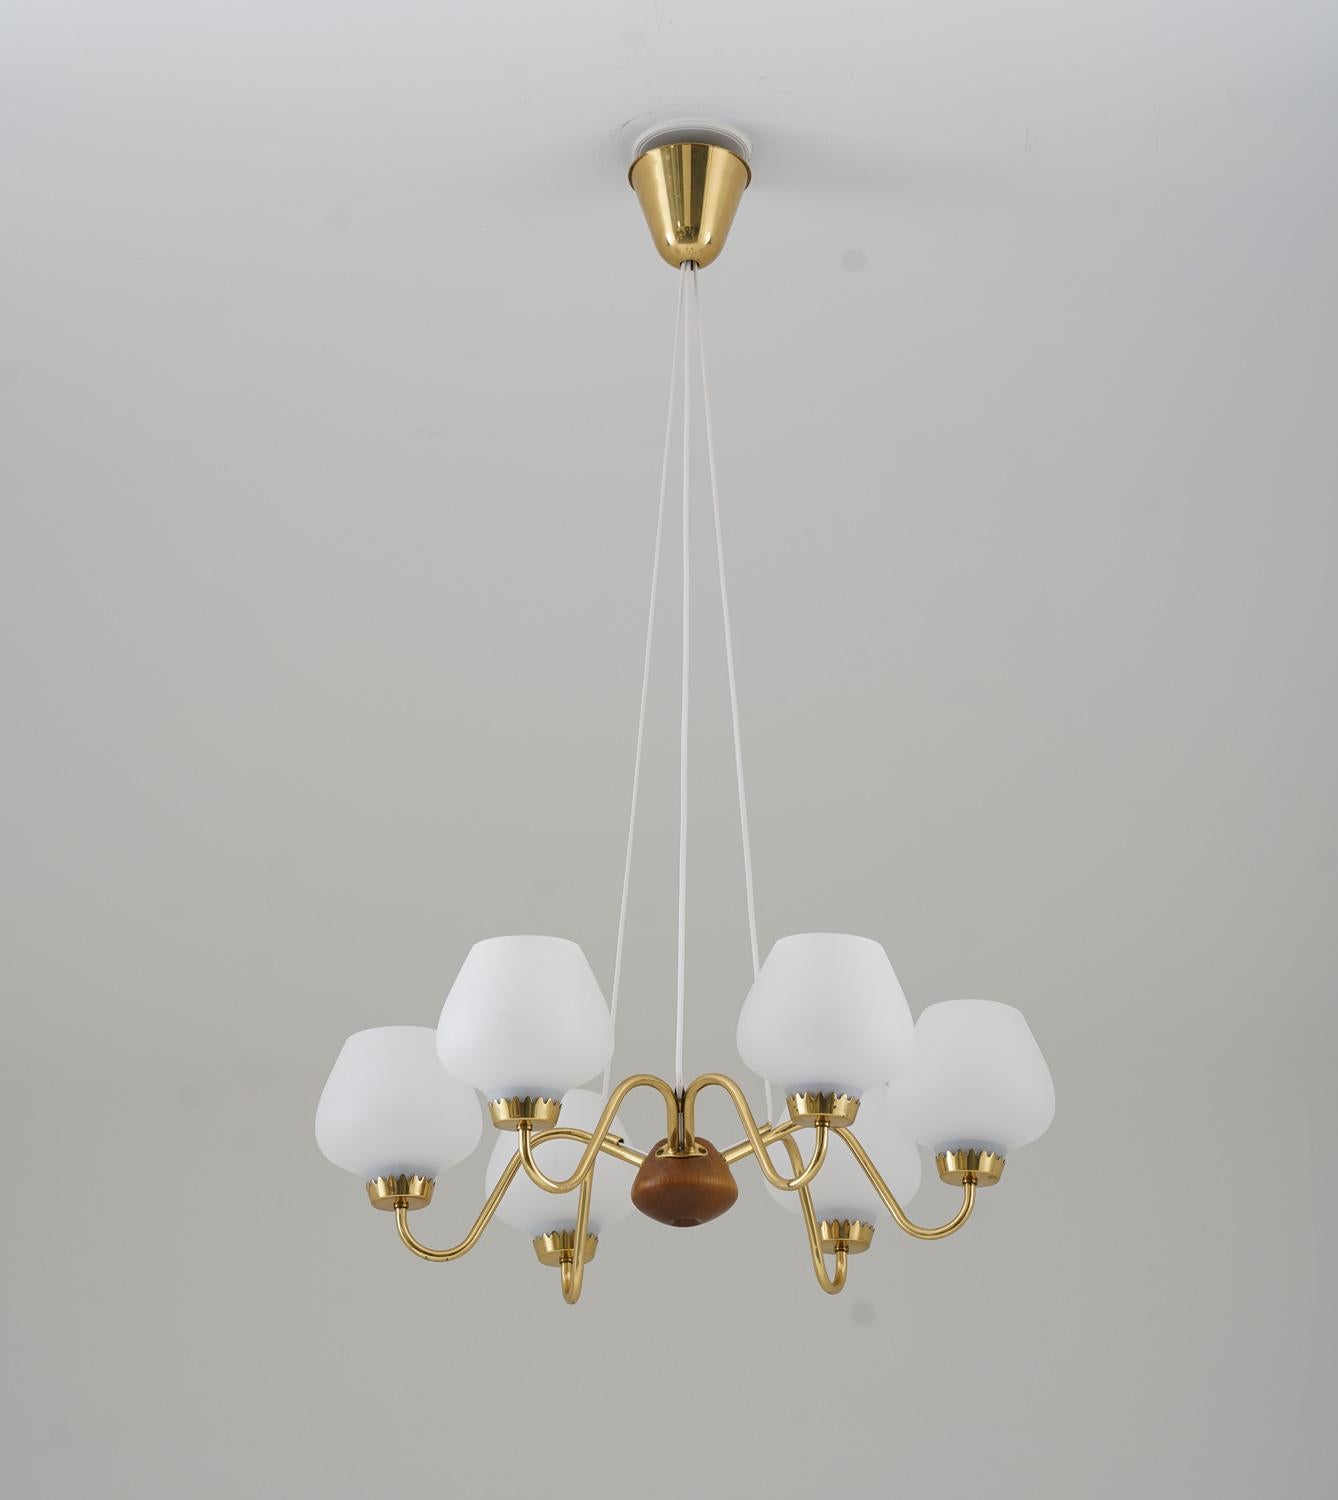 Midcentury pendant in brass, wood and frosted opaline glass manufactured by ASEA, Sweden, 1940s.
This great-looking pendant is made with high quality and great details. It features six light sources, hidden by frosted opaline glass shades. The